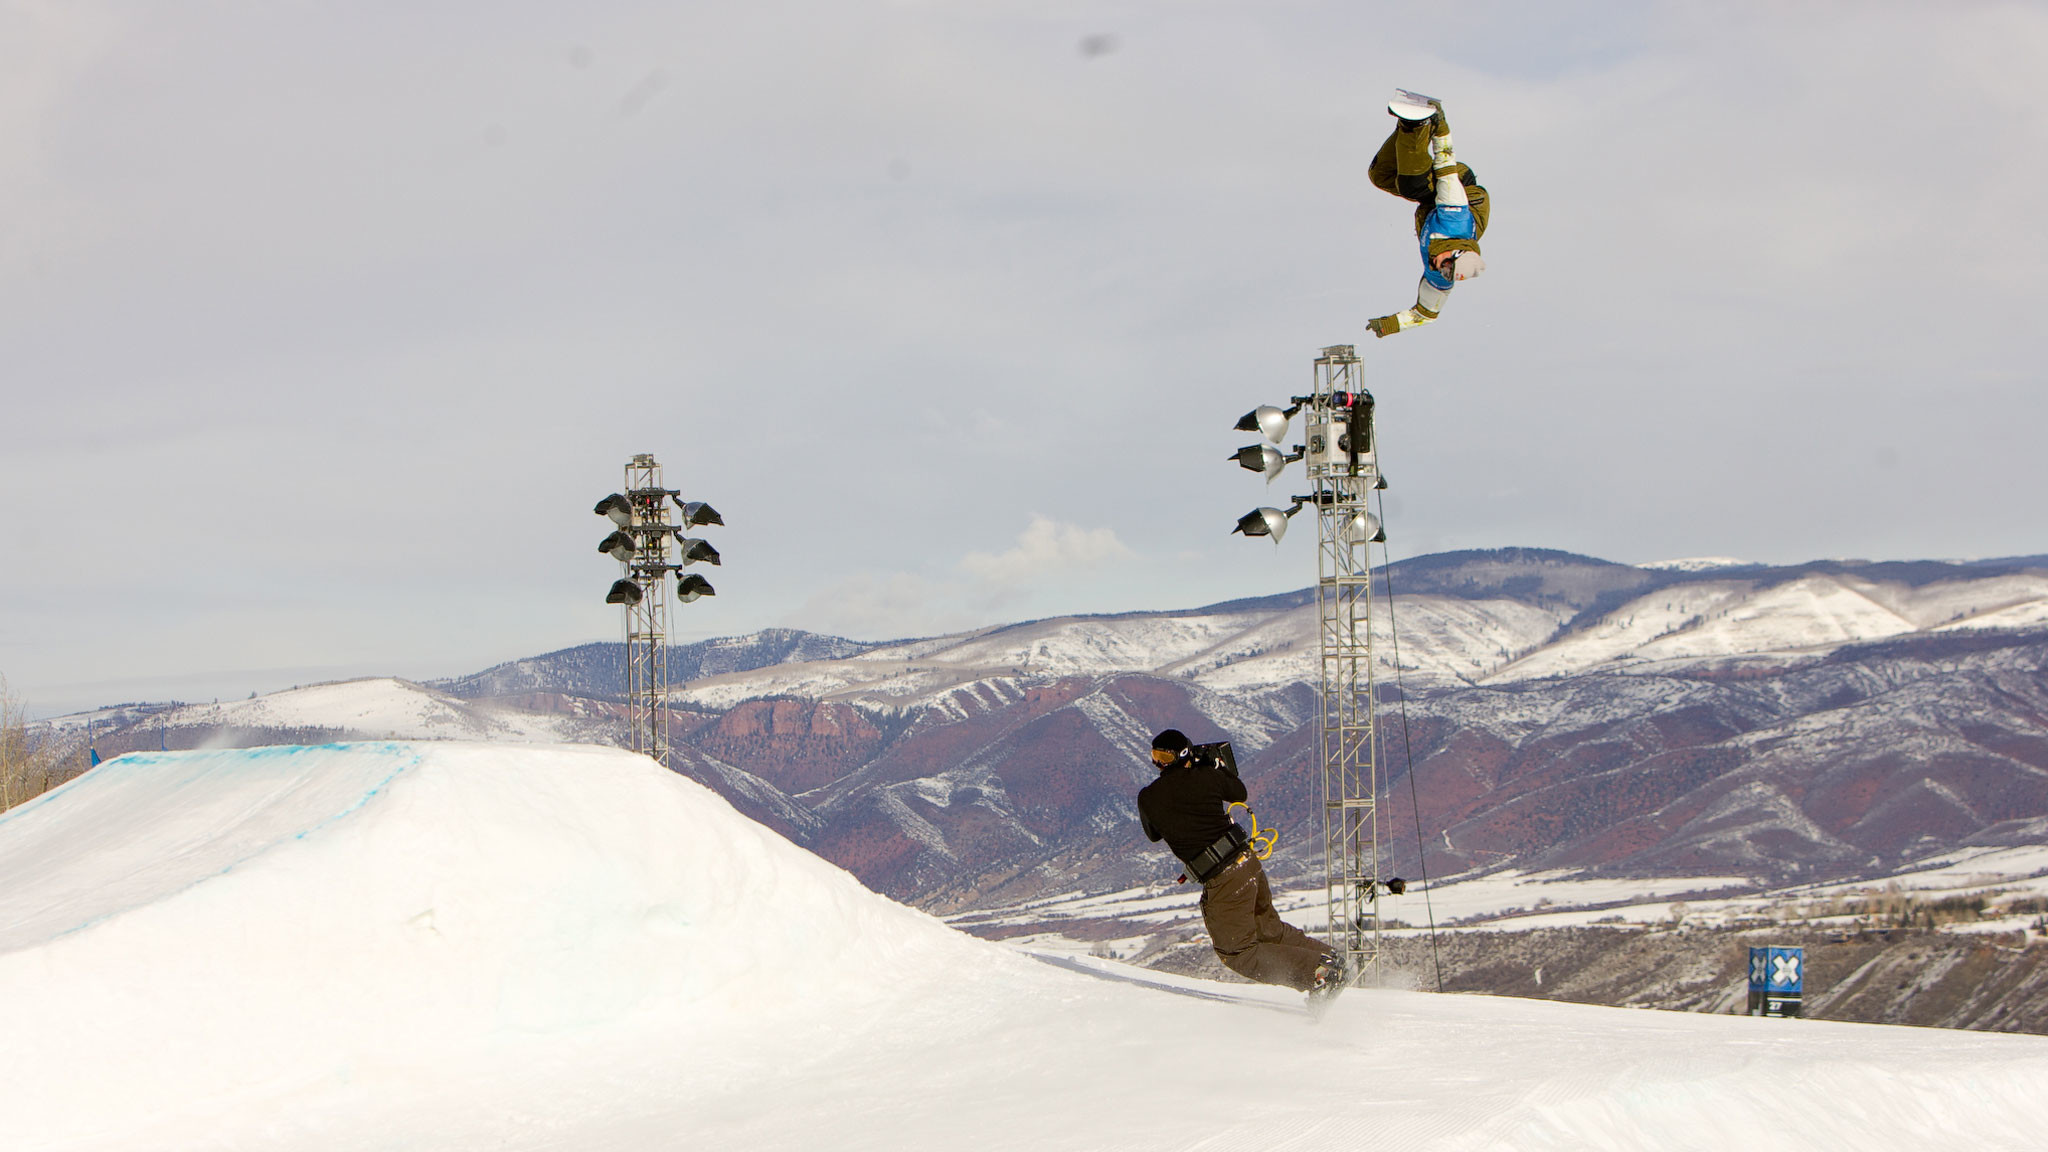 2048x1152 Backcountry freestyle and snowboard film pioneer Travis Rice, pictured  here, won slopestyle bronze at